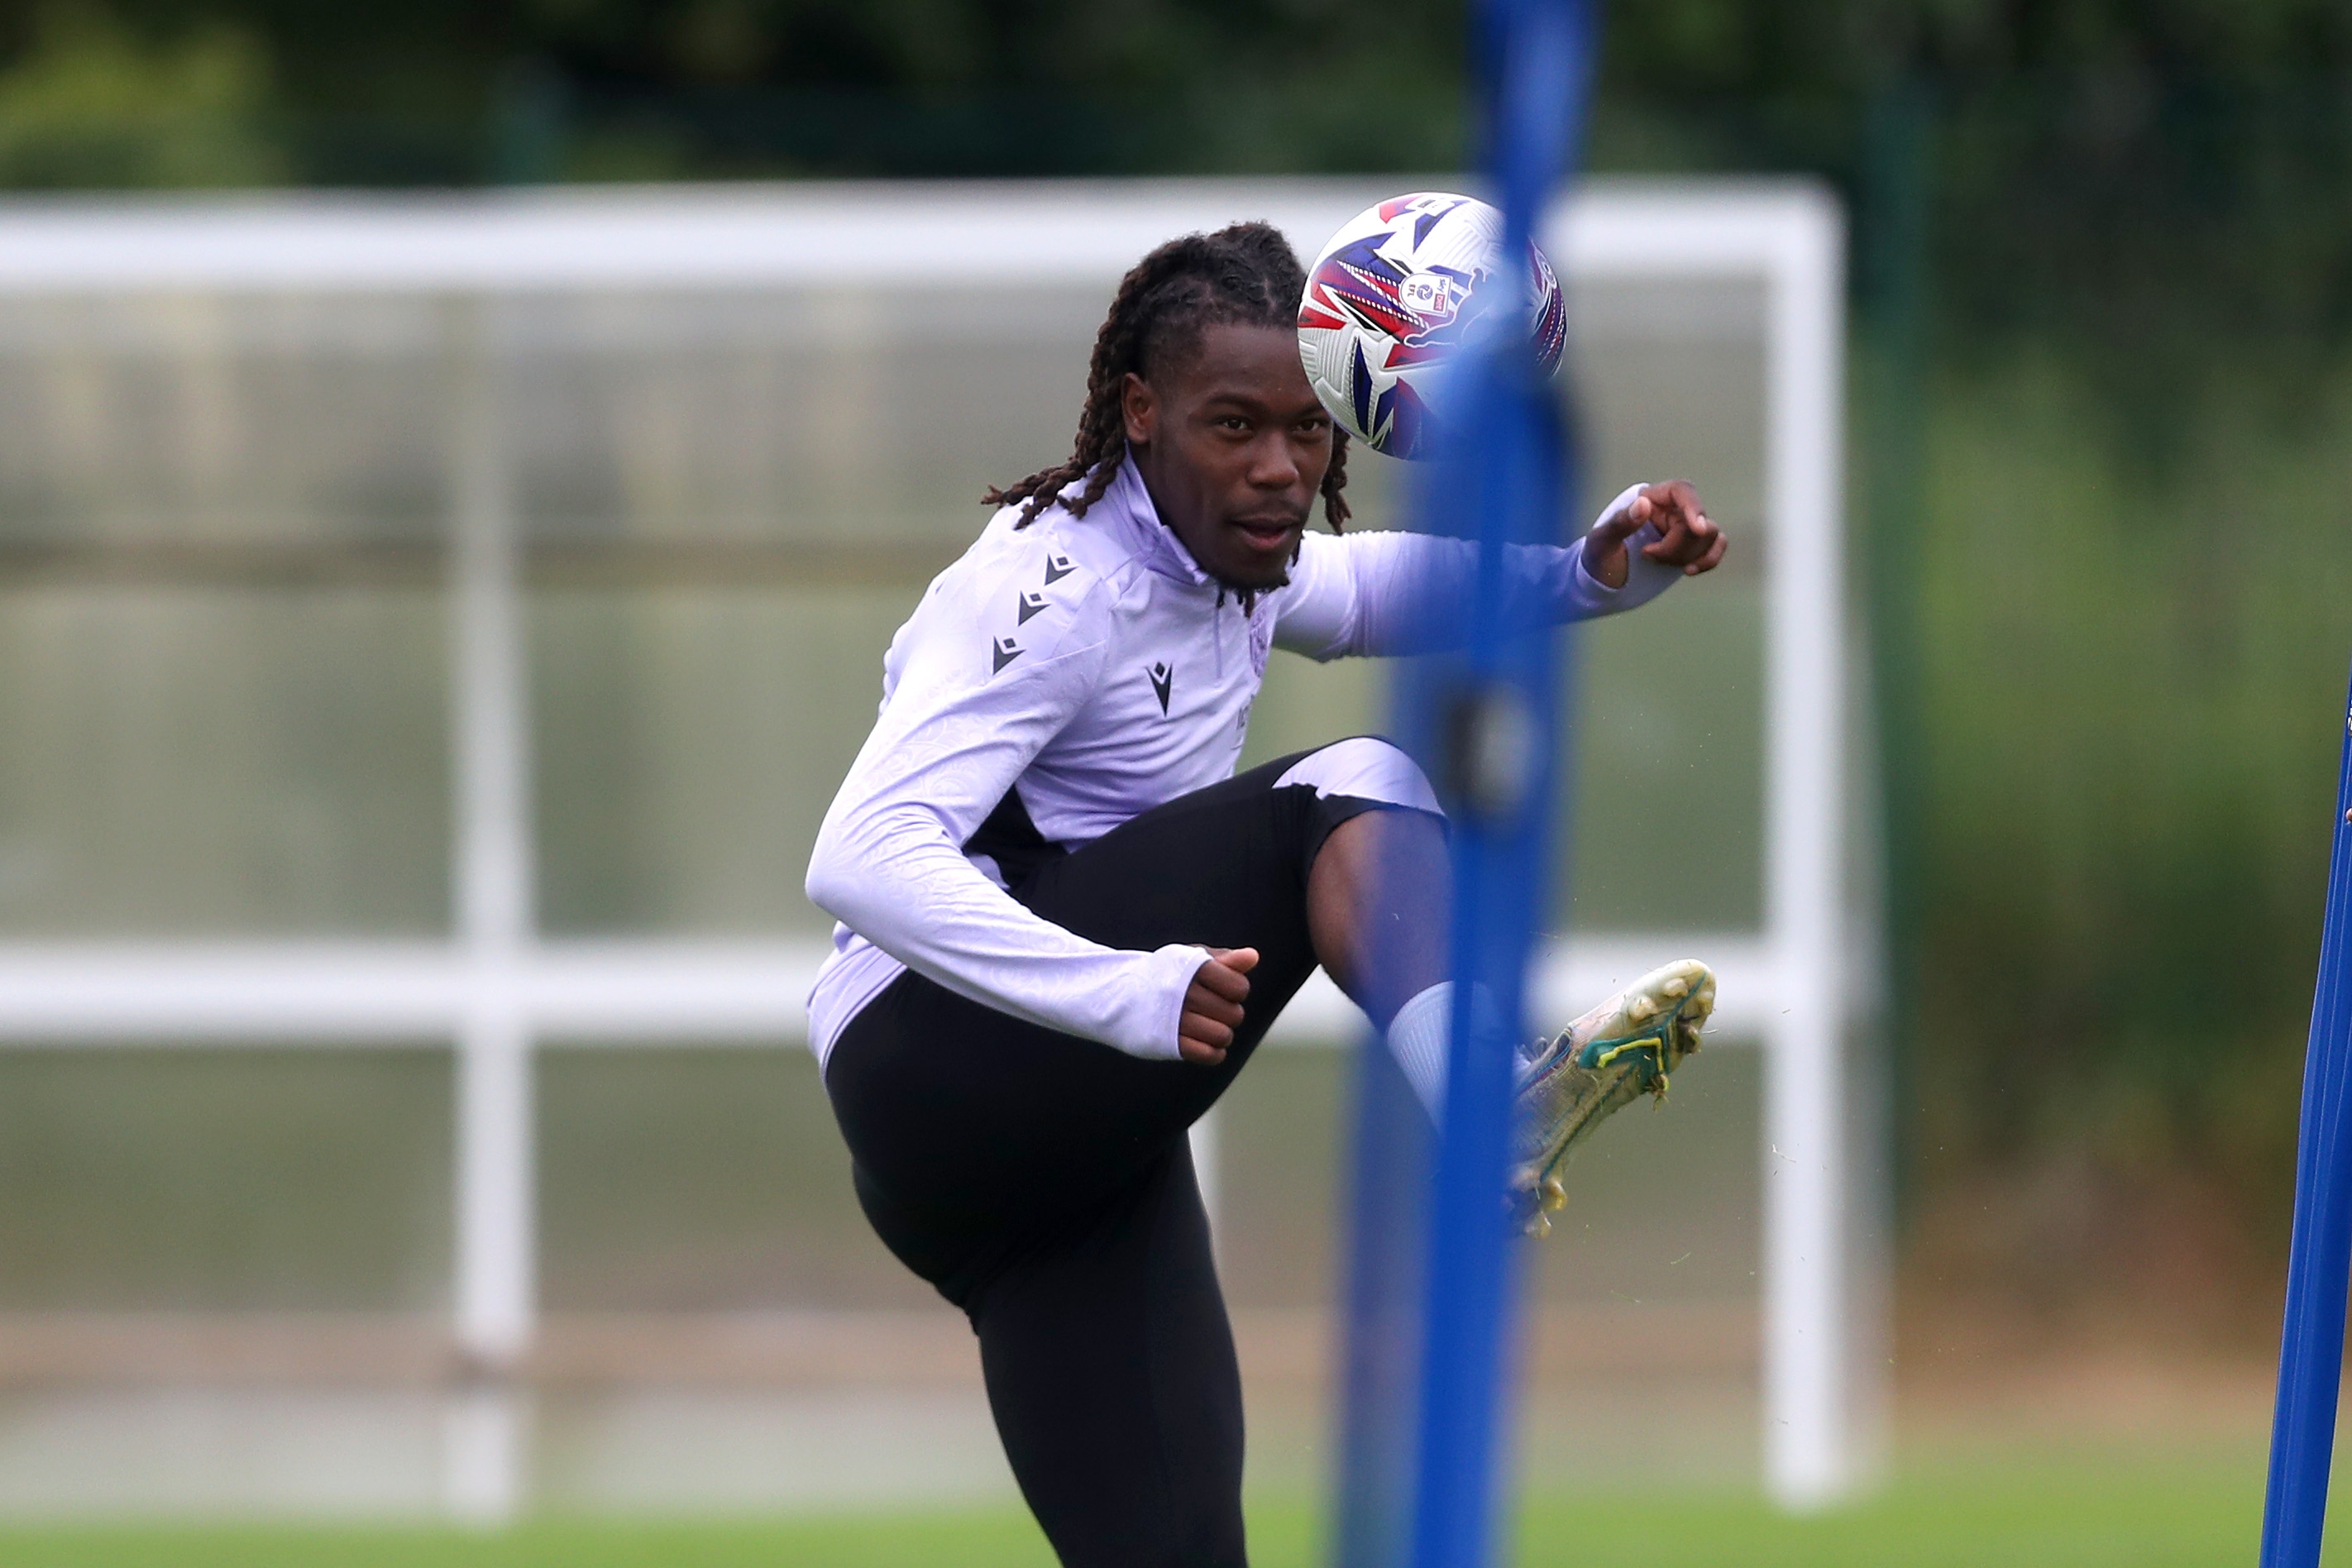 Brandon Thomas-Asante controlling the ball during a training session 